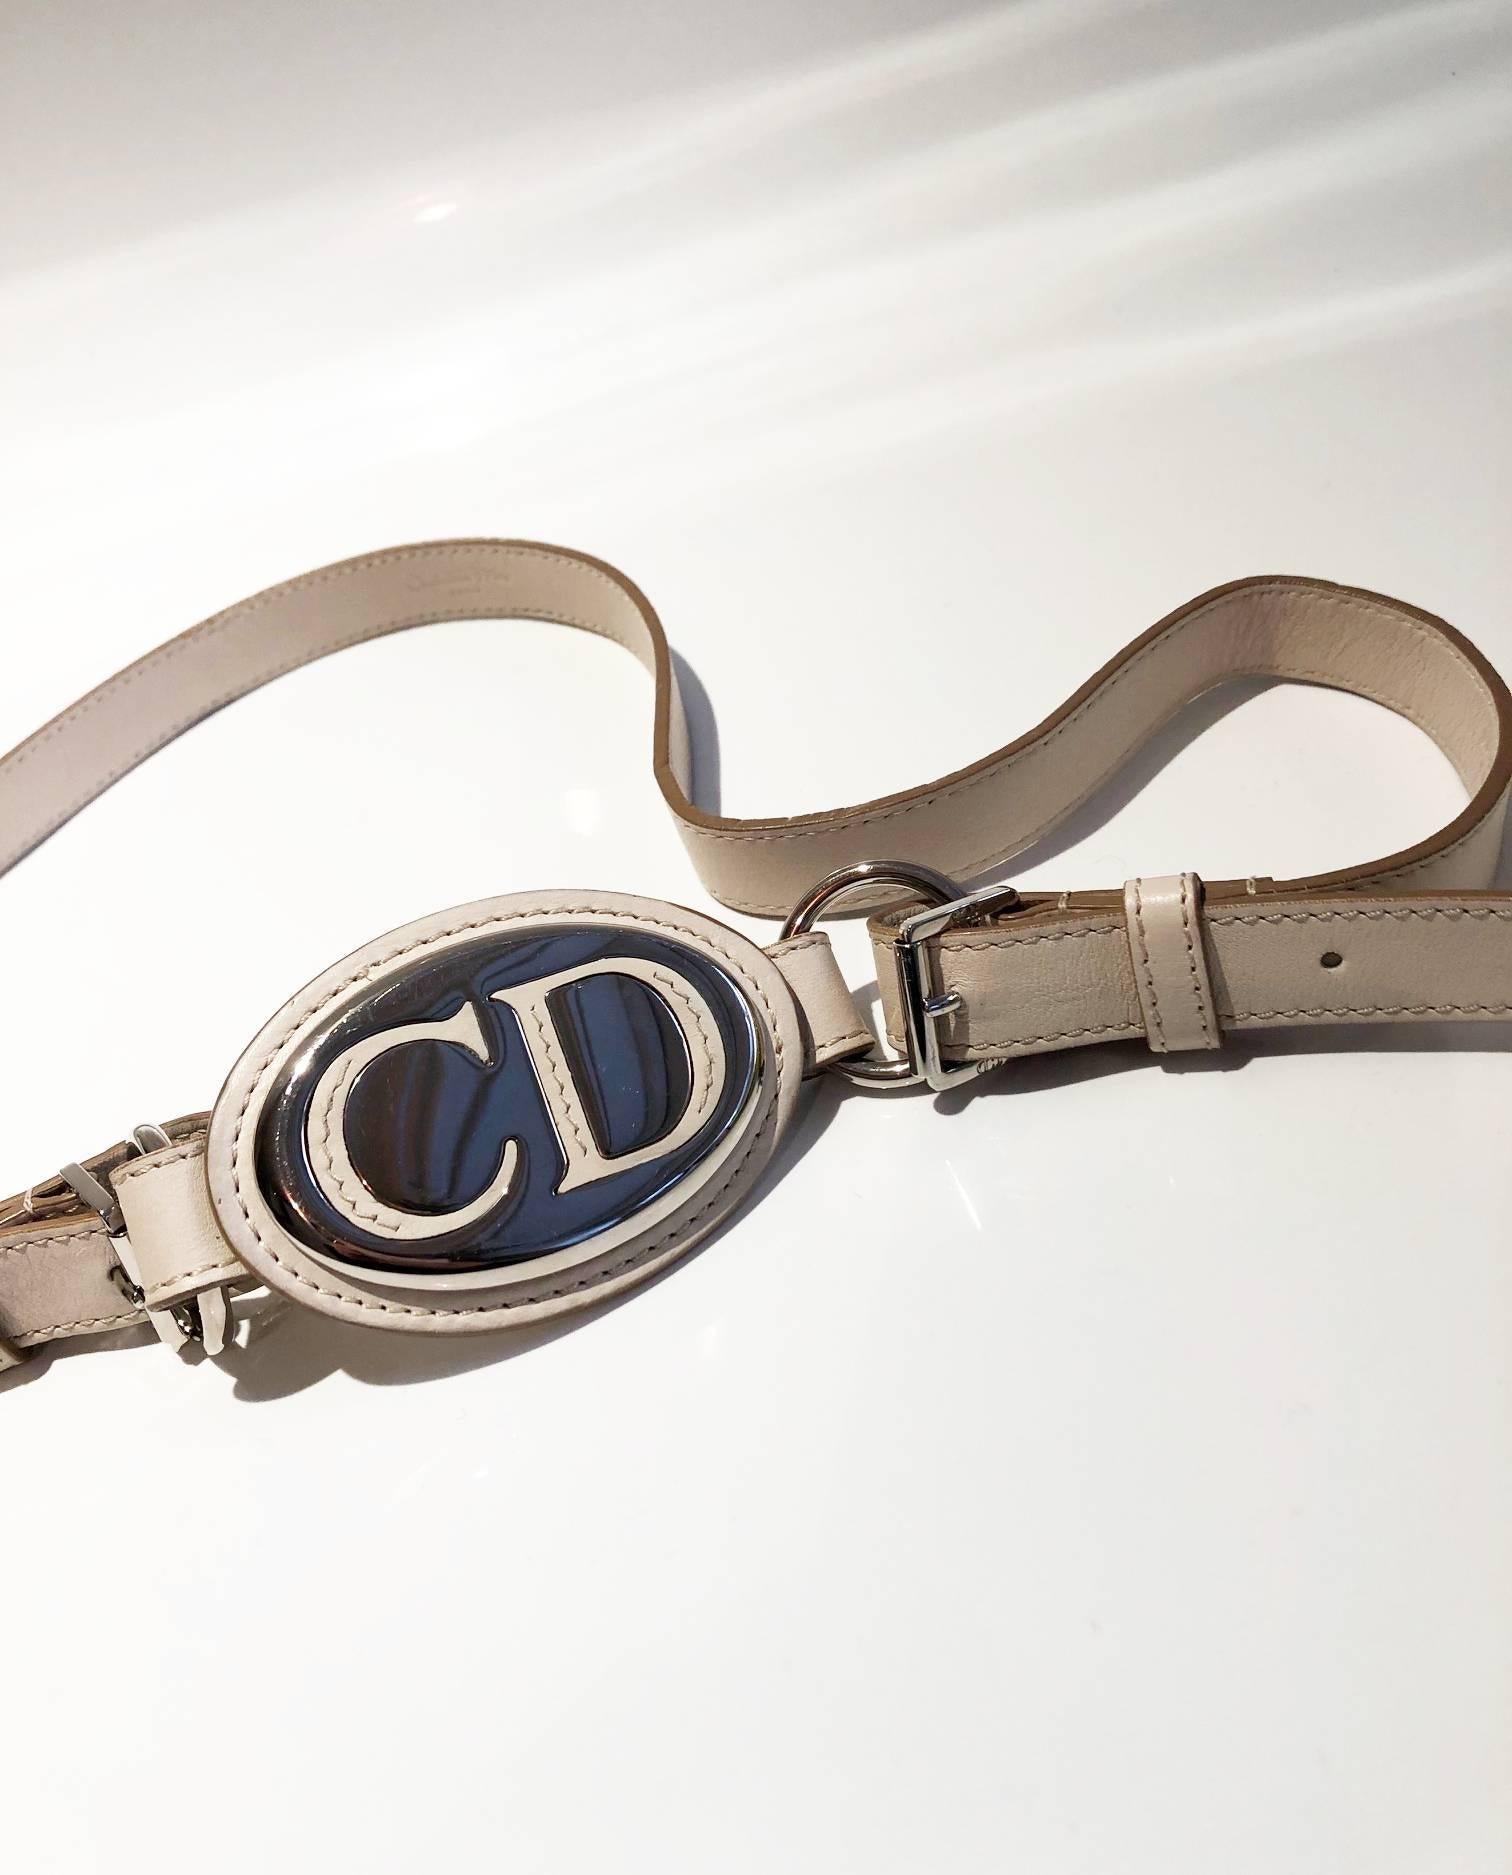 This is a beautiful belt by John Galliano for Christian Dior, in white leather, chrome CD logo buckle, side clutch adjustable closure. pretty on both denim outfit and with a skirt, Made in France 

Condition: 2000s. in very good condition just a